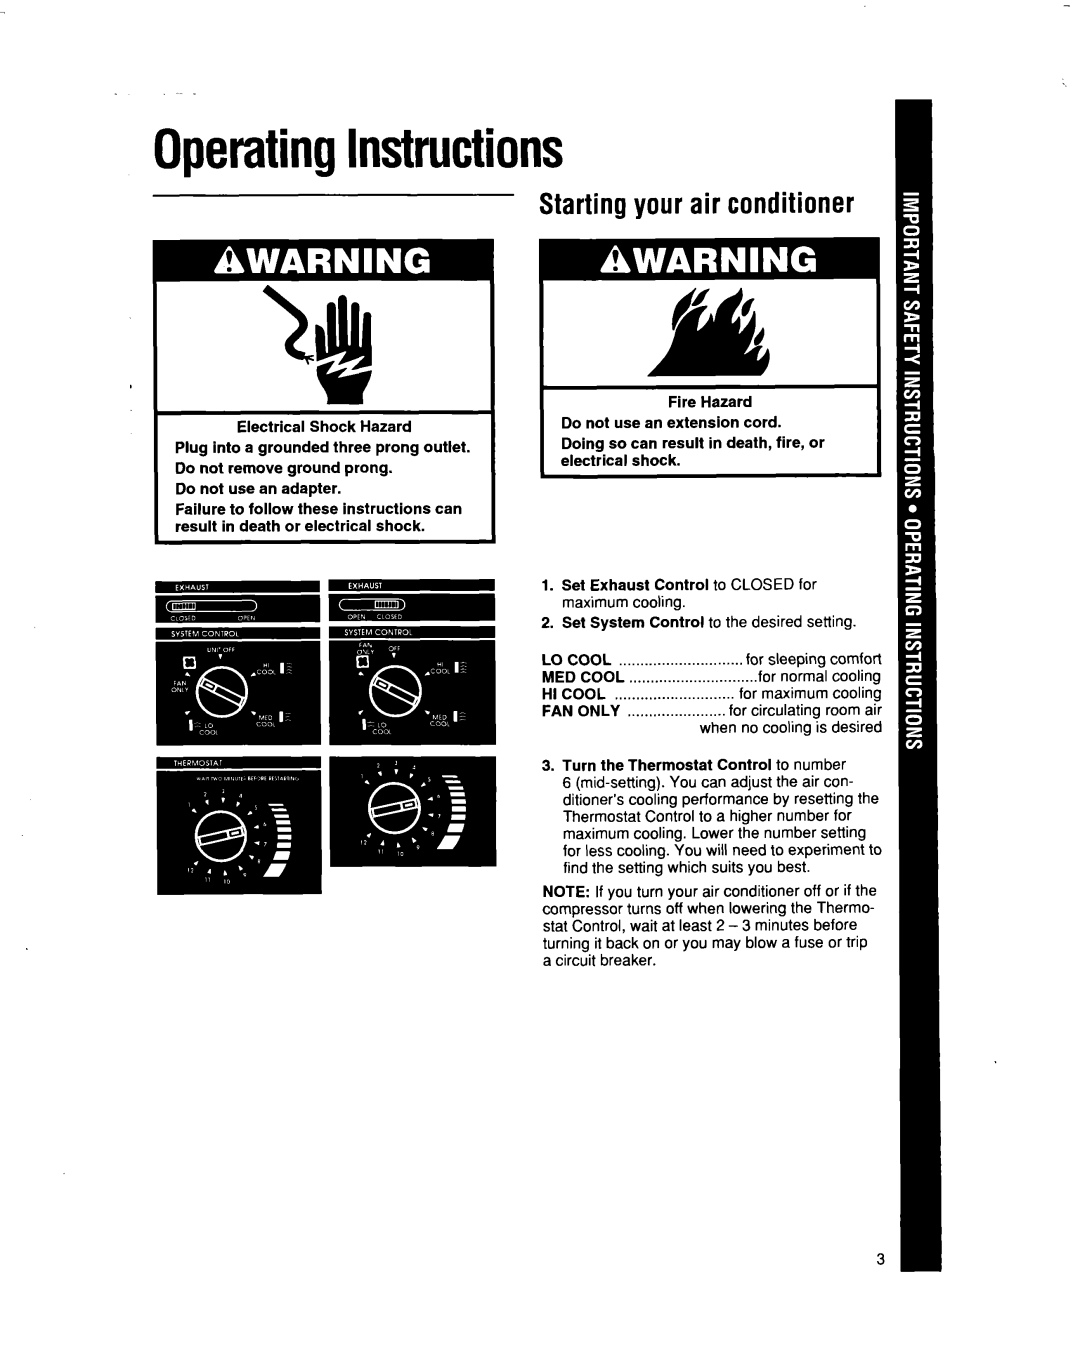 Whirlpool BHAC1000XS0 manual OperatingInstructions, Startingyour air conditioner 